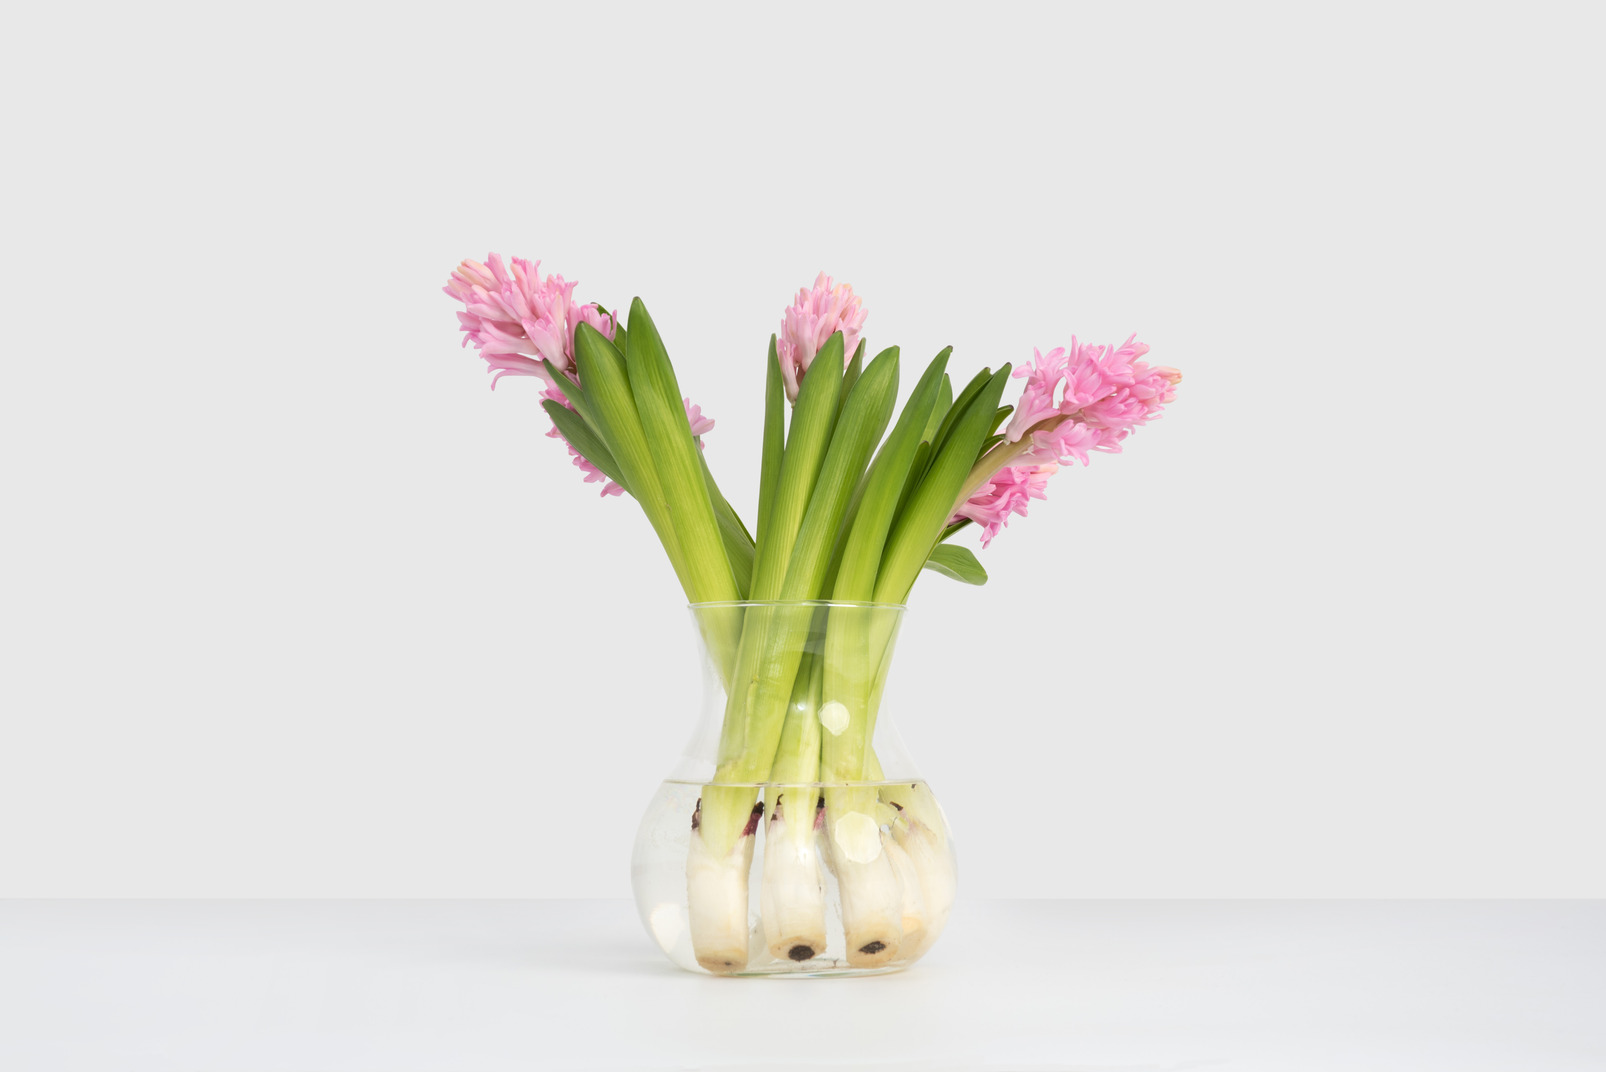 Pink hyacinths in clear glass vase